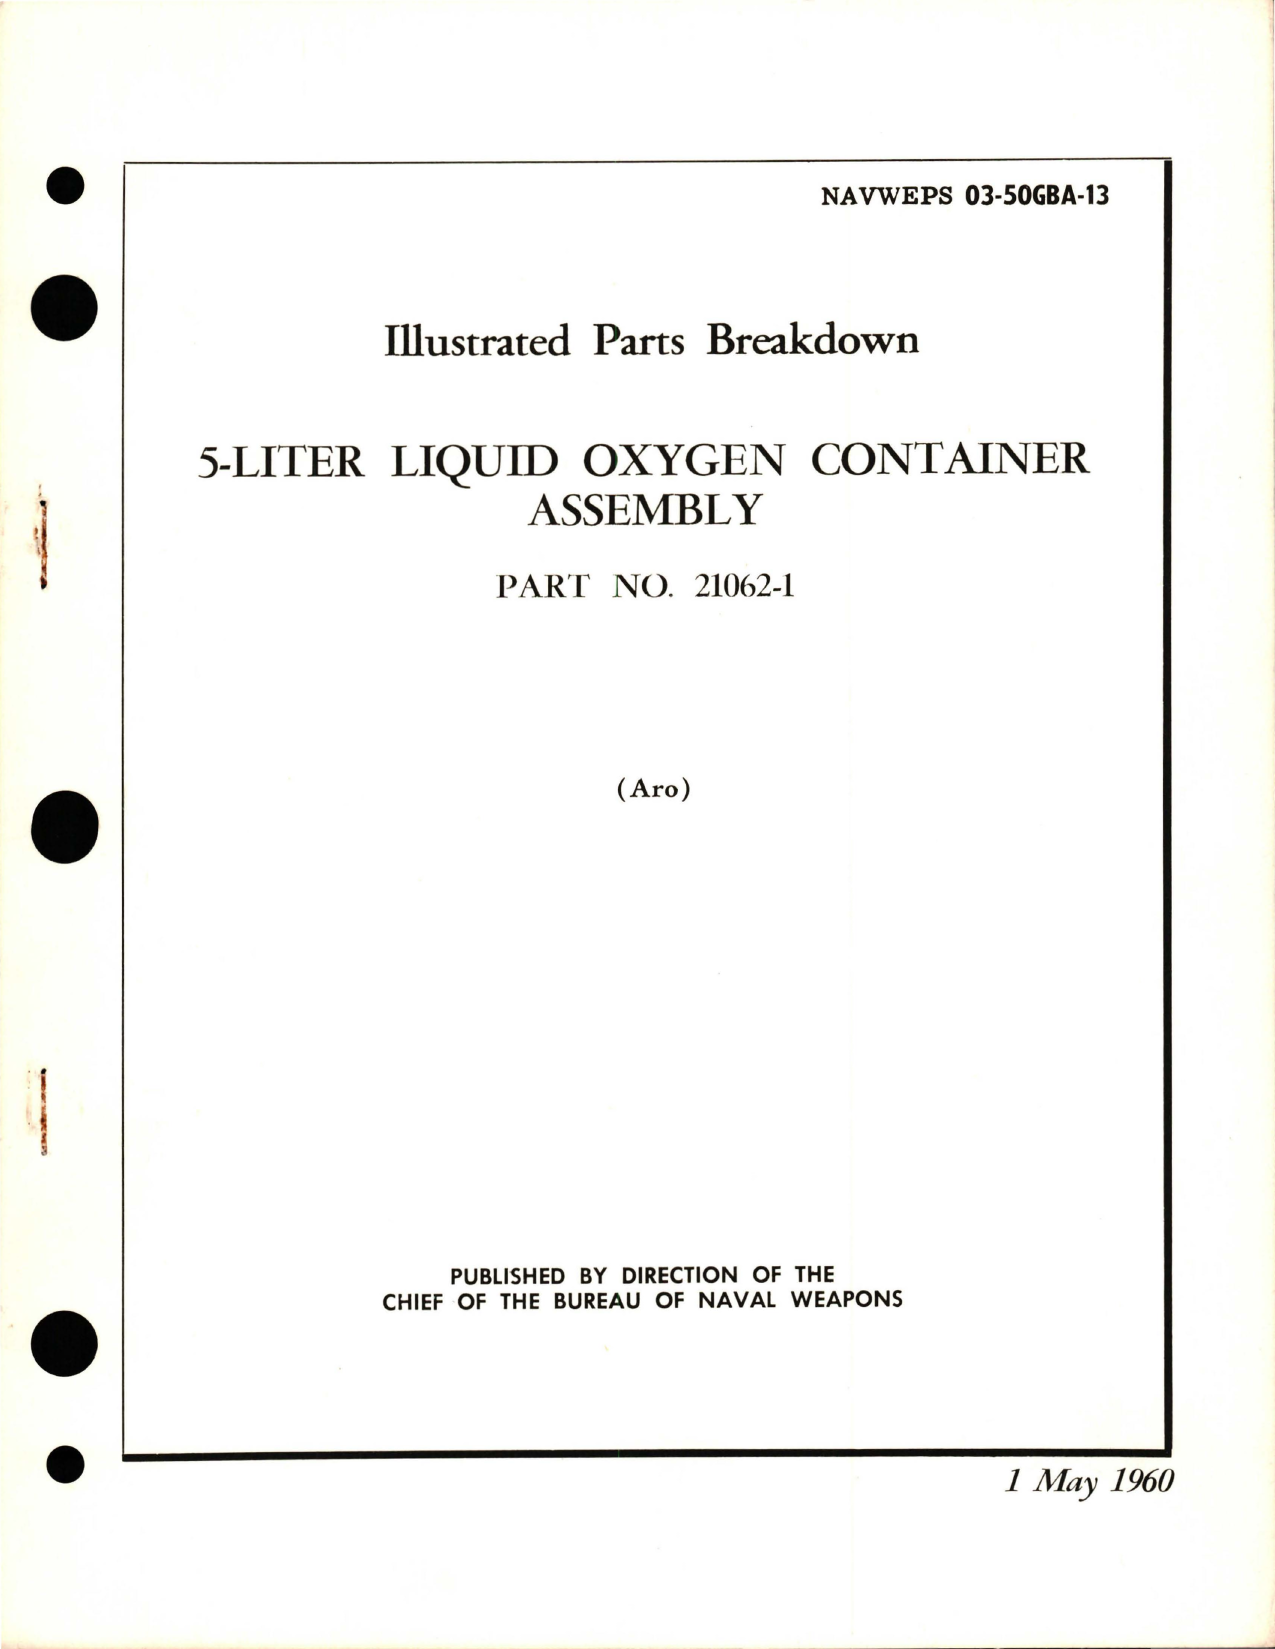 Sample page 1 from AirCorps Library document: Illustrated Parts Breakdown for 5-Liter Liquid Oxygen Container Assembly - Part 21062-1 